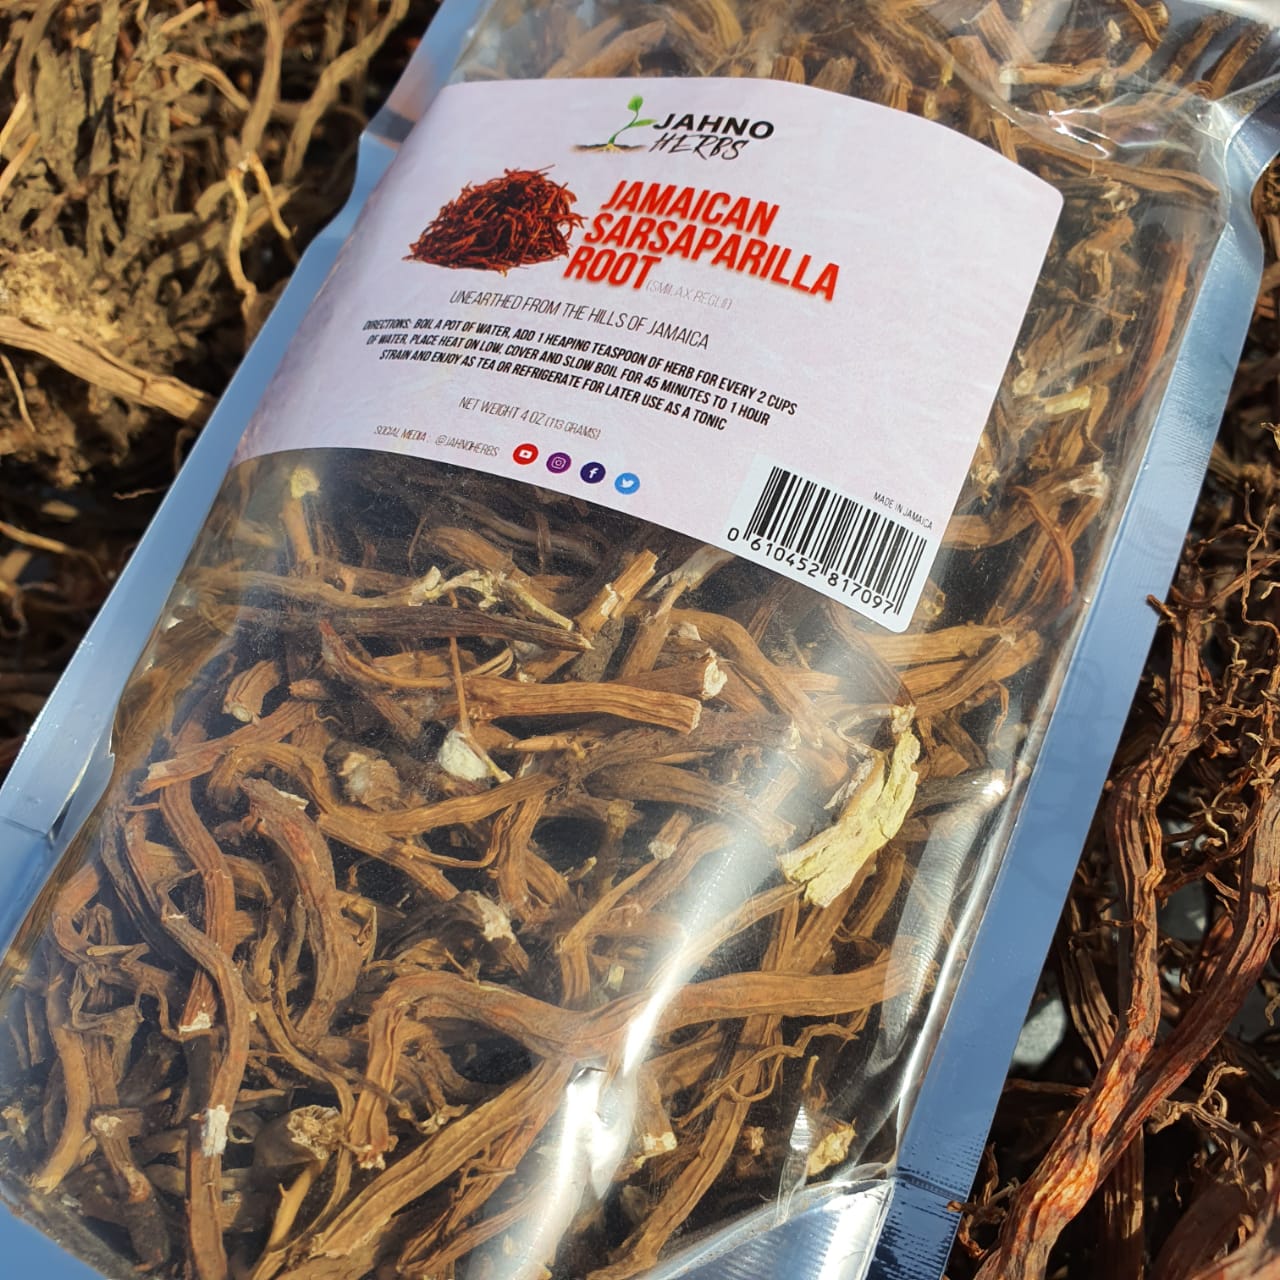 Jamaican Wildcrafted Sarsaparilla Root - Forever Natural Remedies